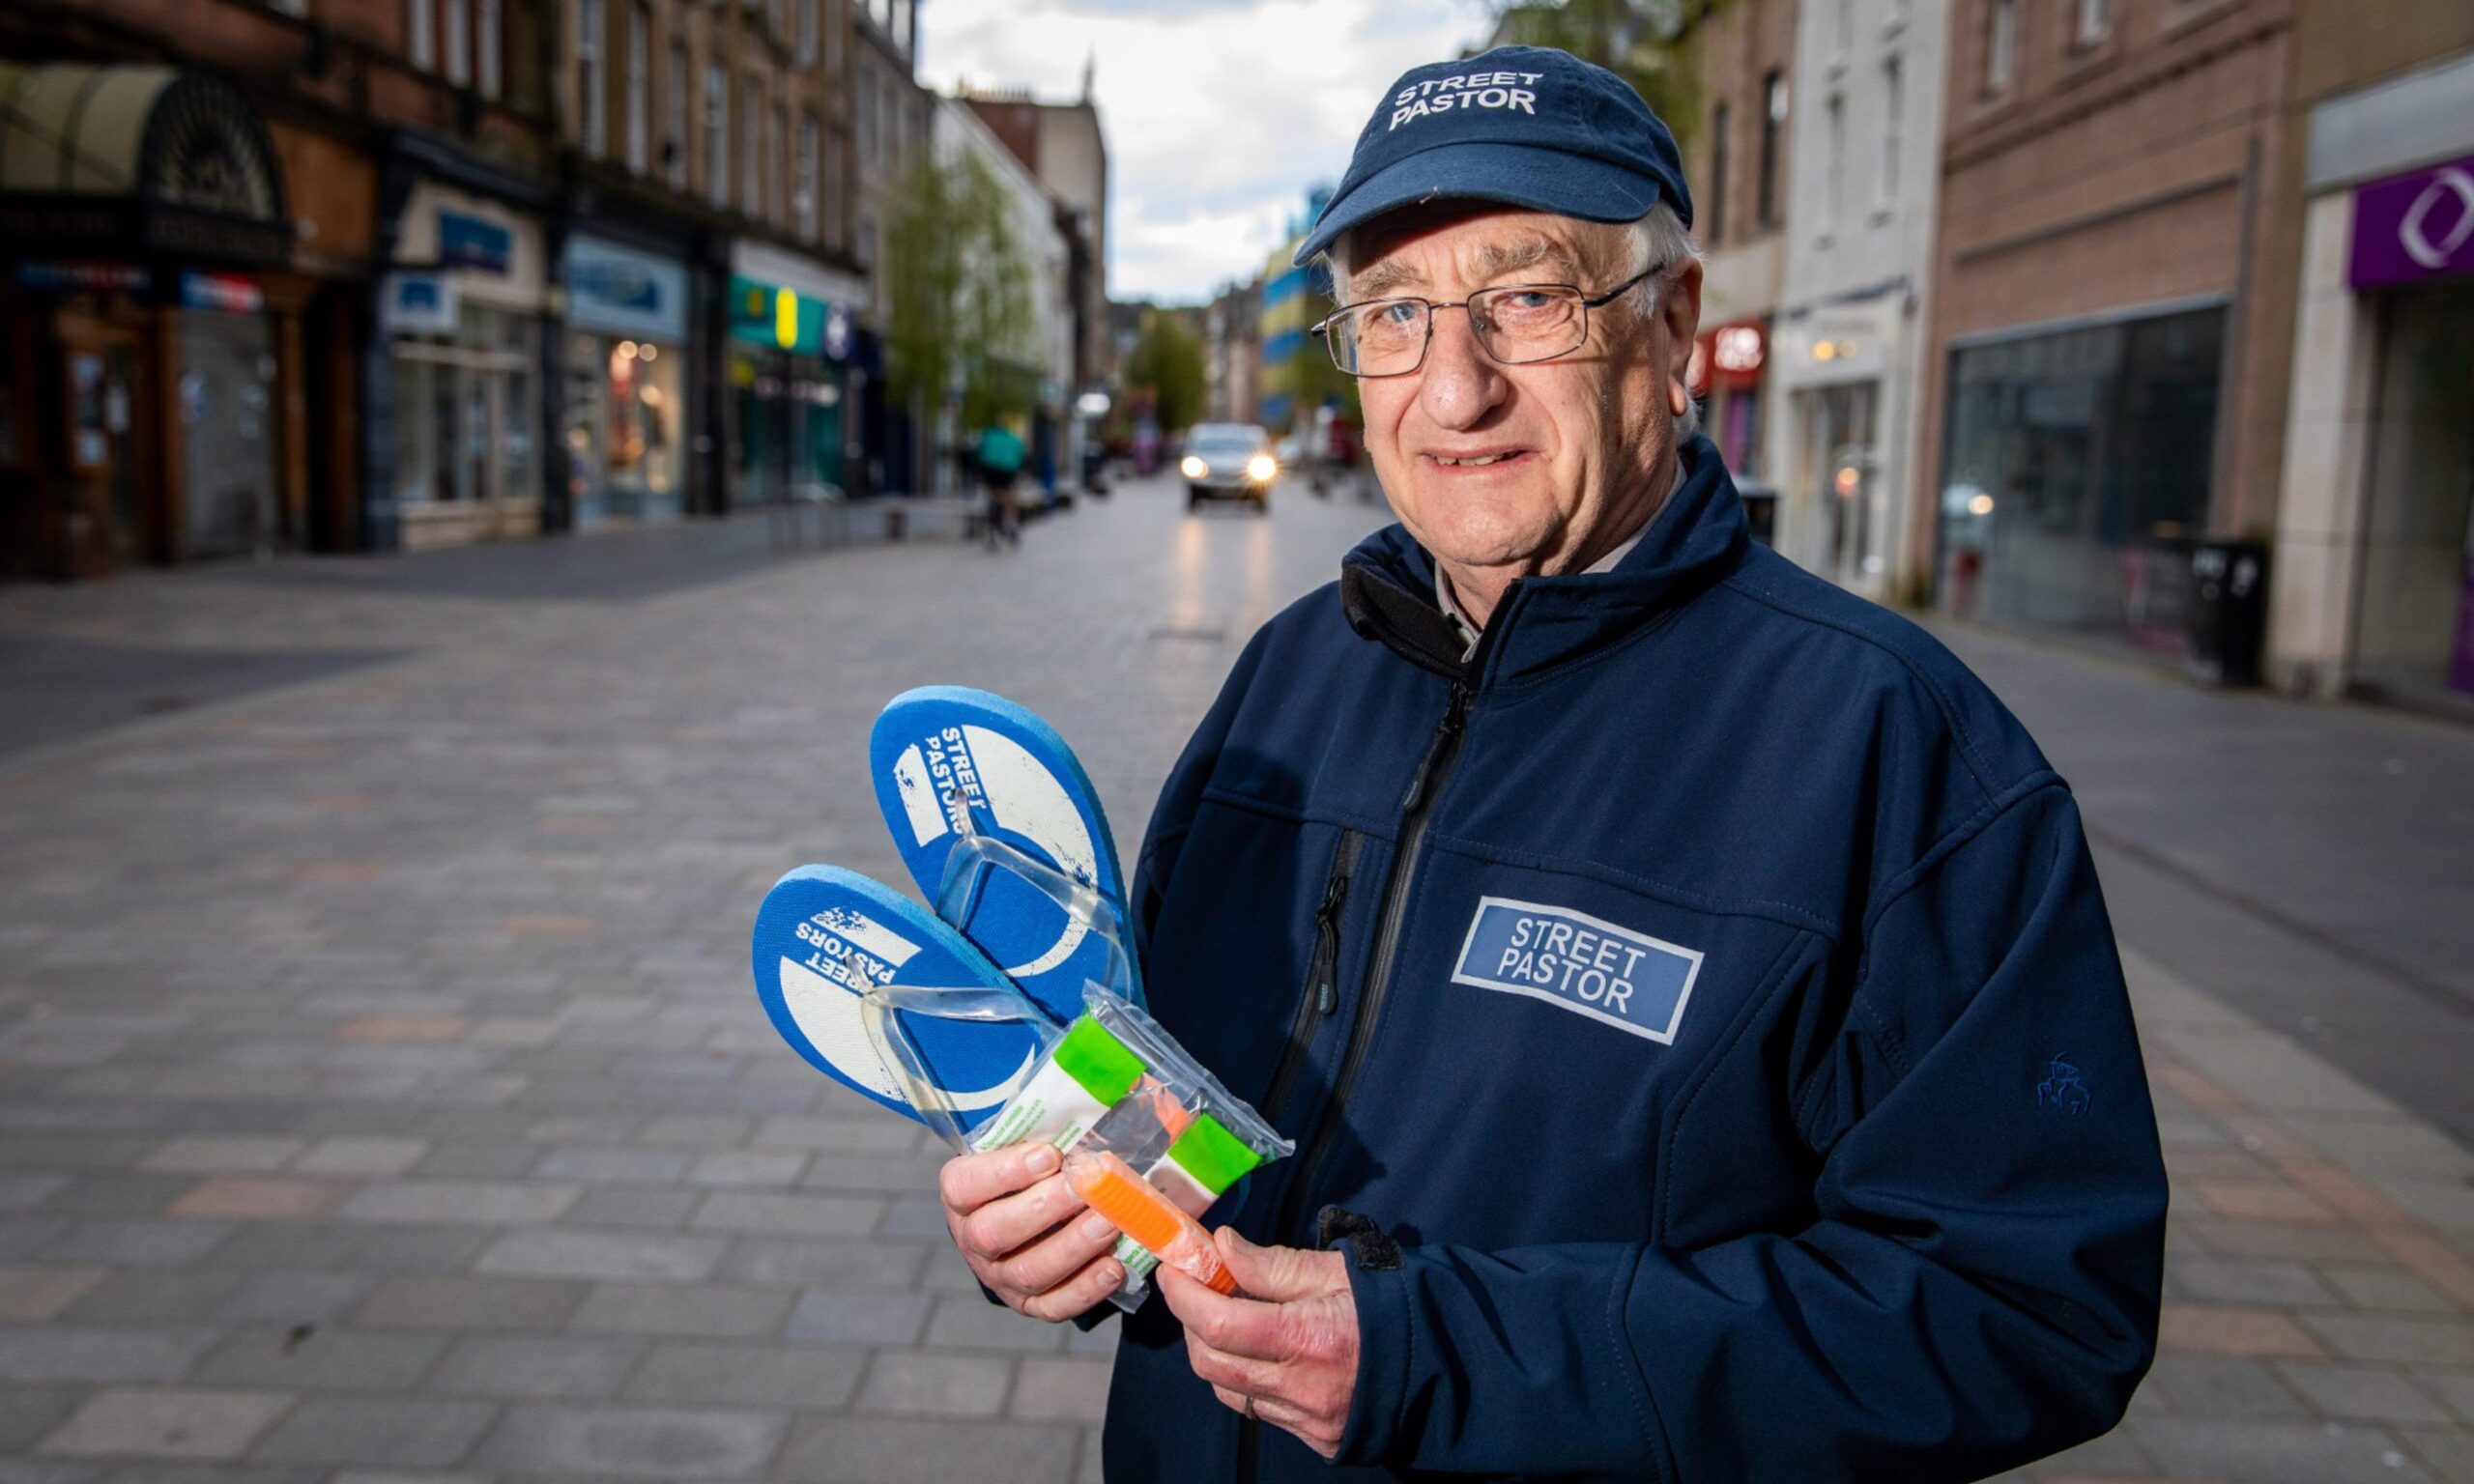 Michael Archibald founded Perth Street Pastors in 2008.